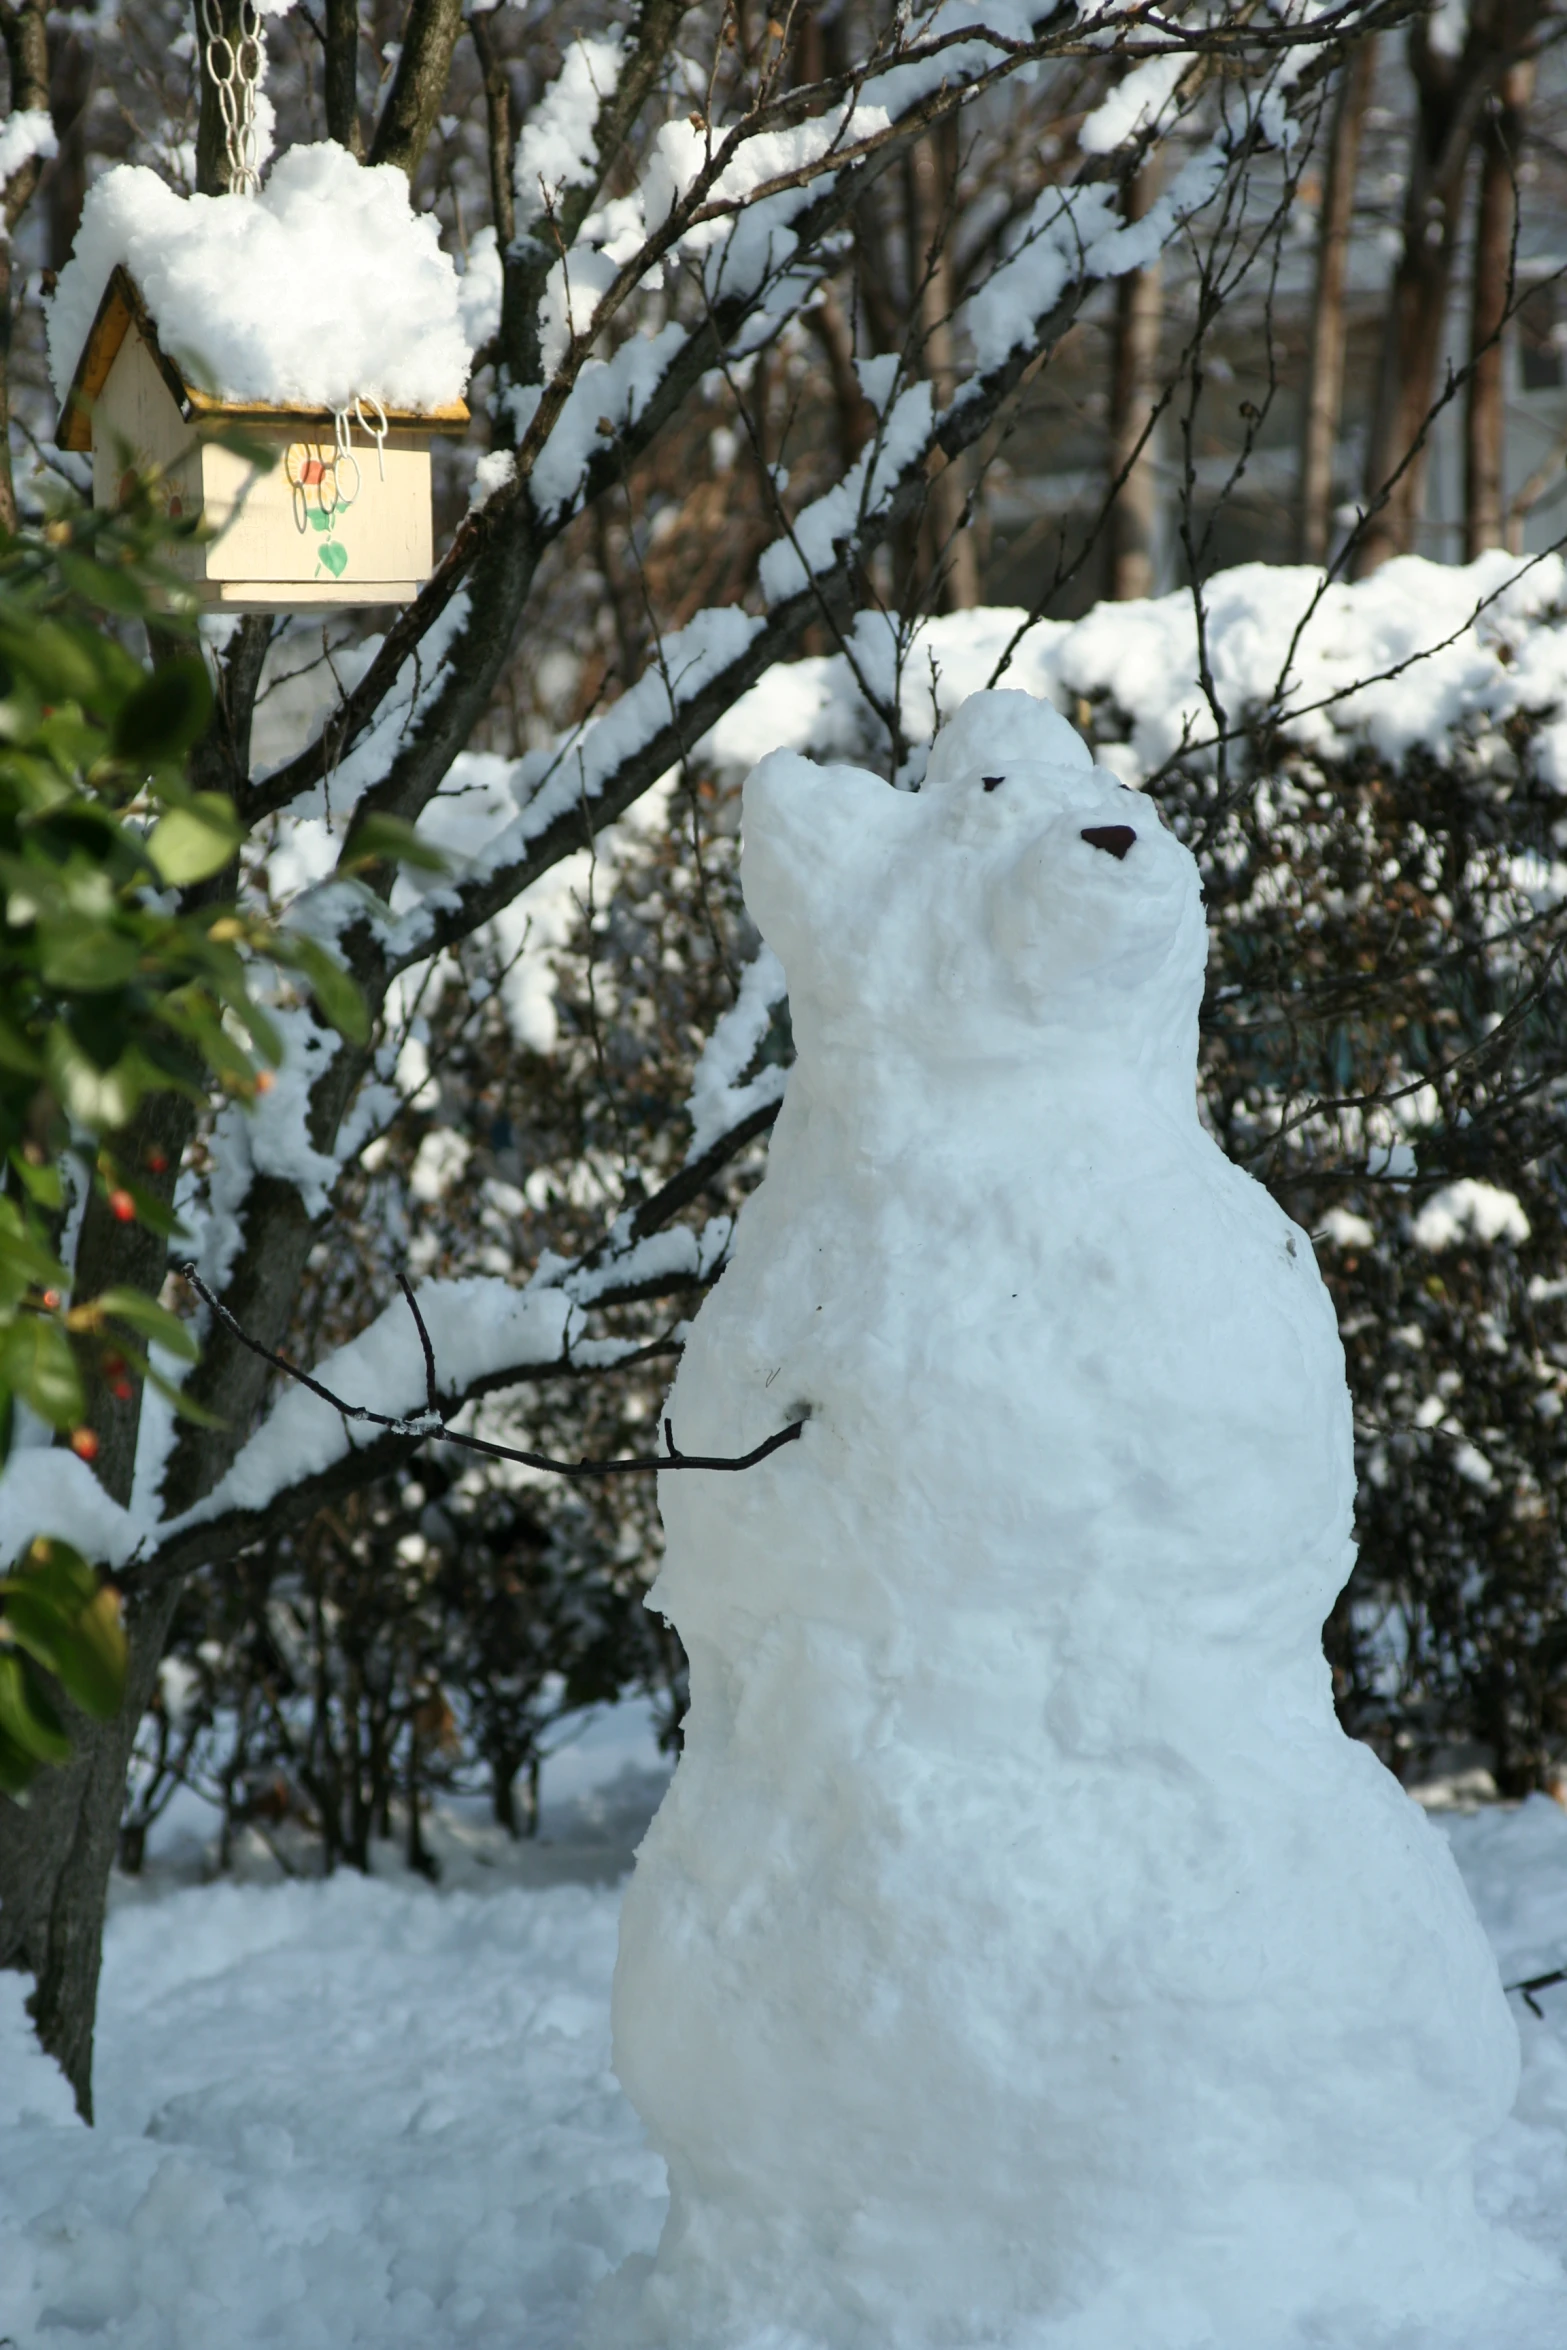 snowman made from nches and ground and hanging from a wire